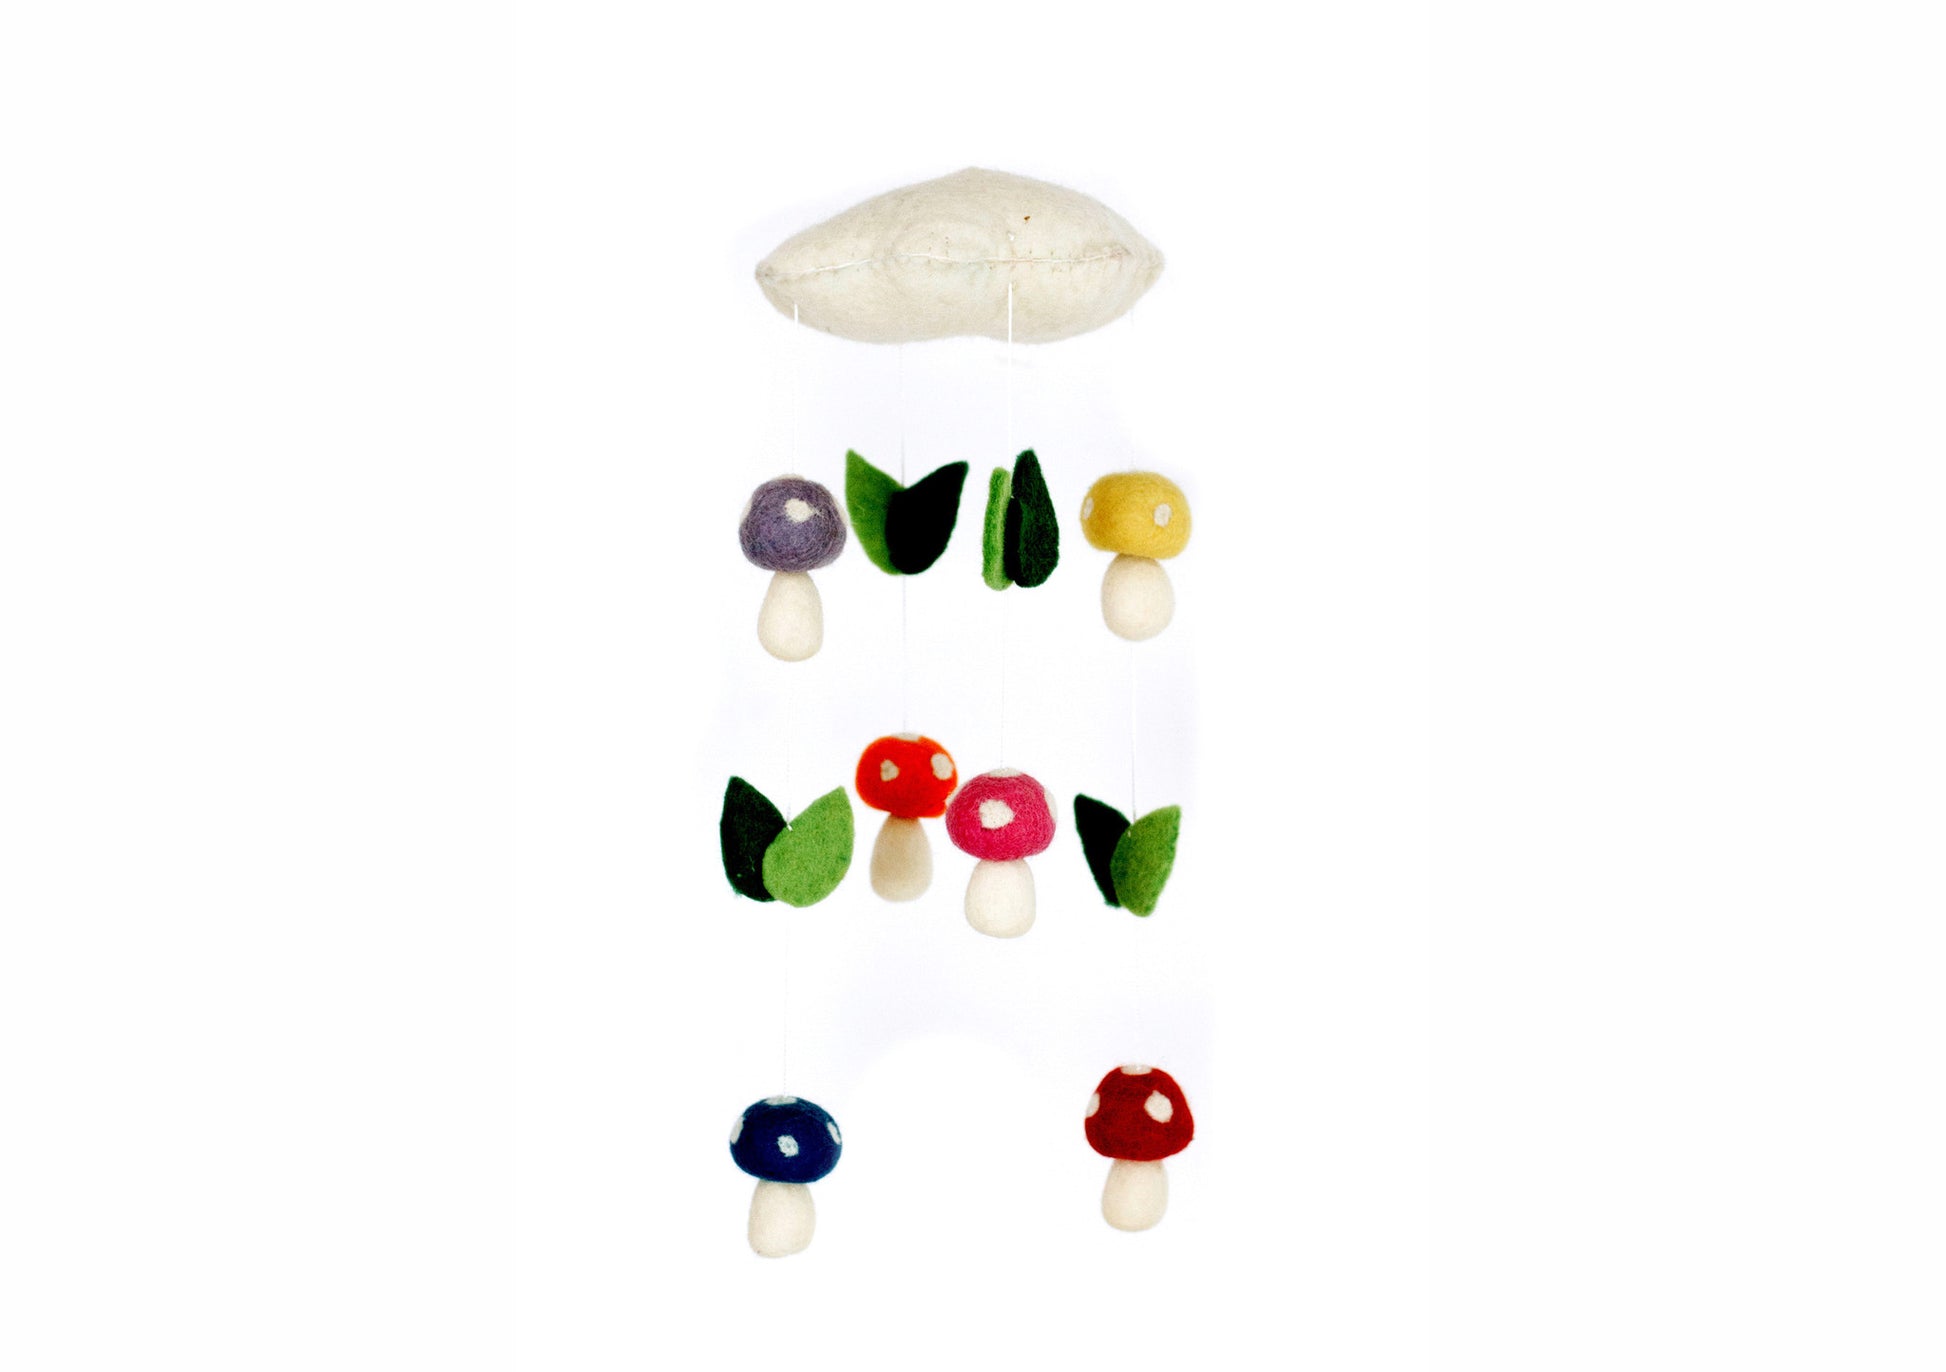 This Global Groove Life, handmade, ethical, fair trade, eco-friendly, sustainable, White Cloud felt mobile, with yellow, pink, red, orange, purple and blue mushrooms, was created by artisans in Kathmandu Nepal and will be a beautiful and fun addition to your home.